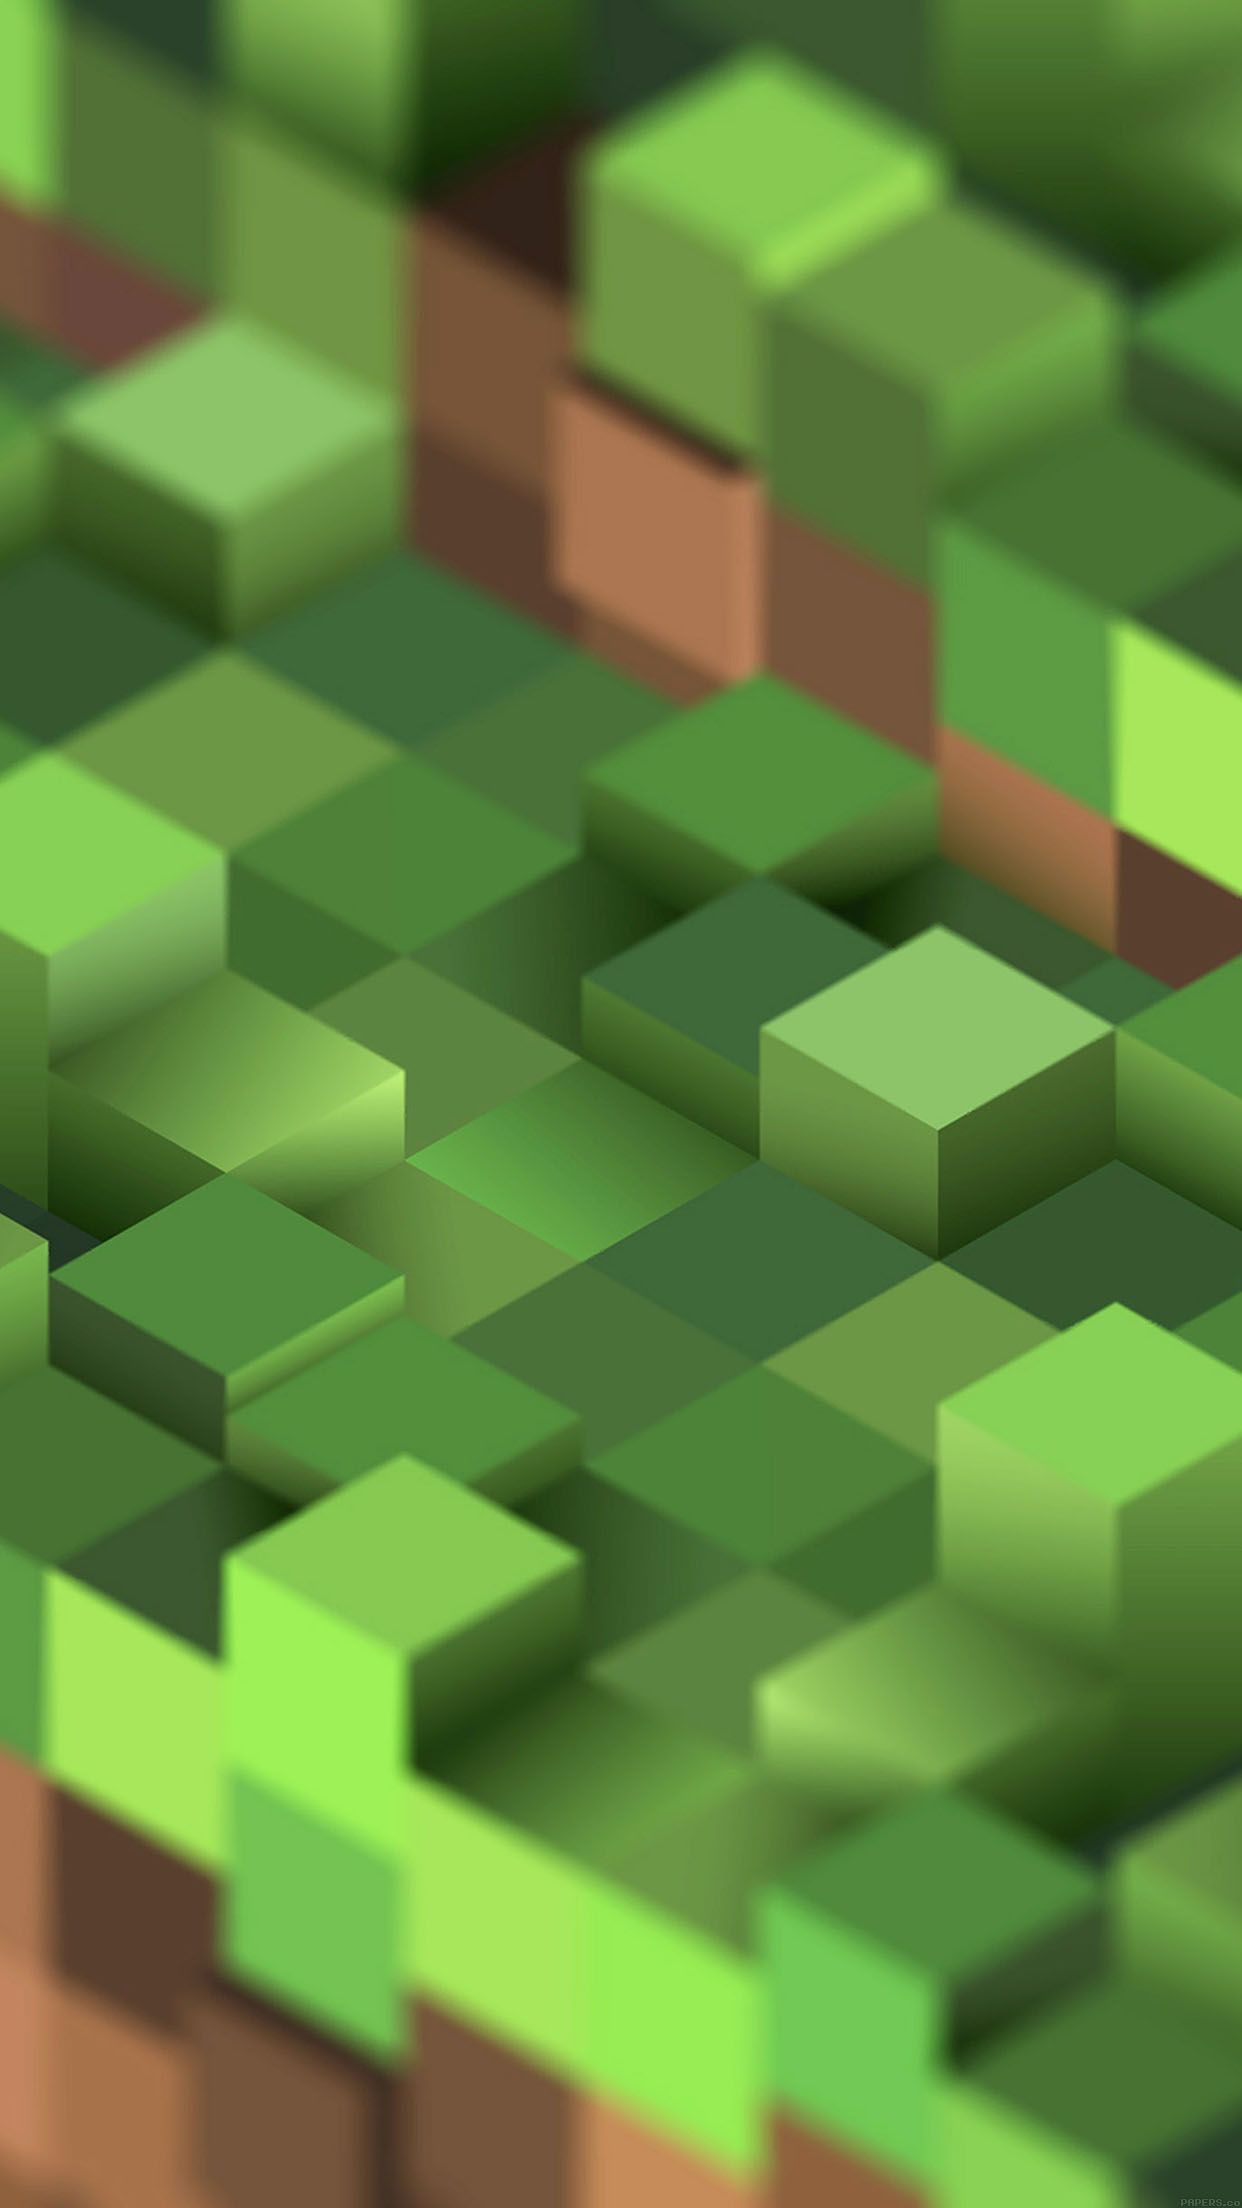 Aggregate 65+ minecraft wallpaper for ipad latest - in.cdgdbentre